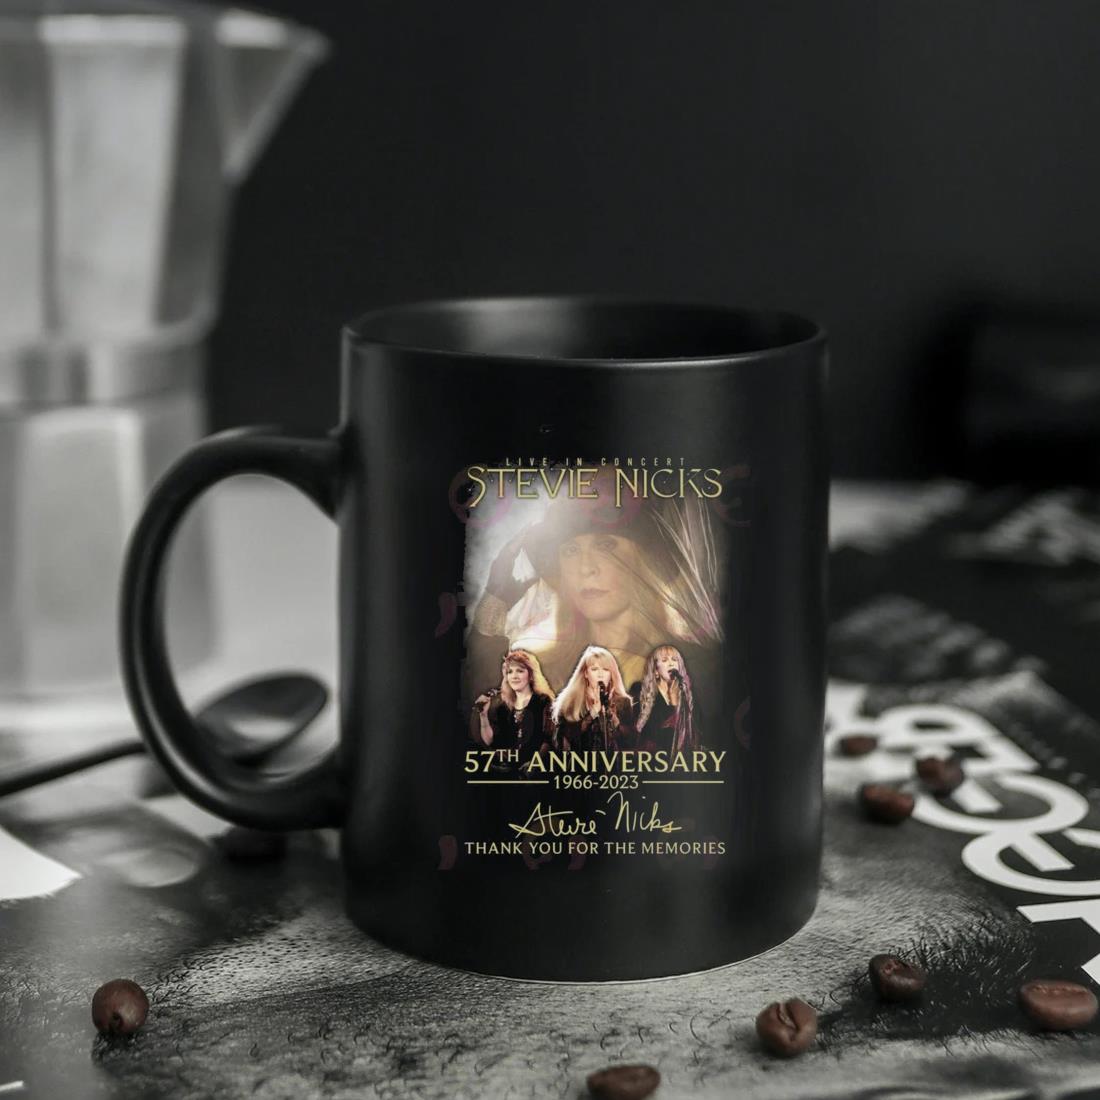 Live In Concert Stevie Nicks 57th Anniversary 1966 – 2023 Thank You For The Memories Signature Mug ten